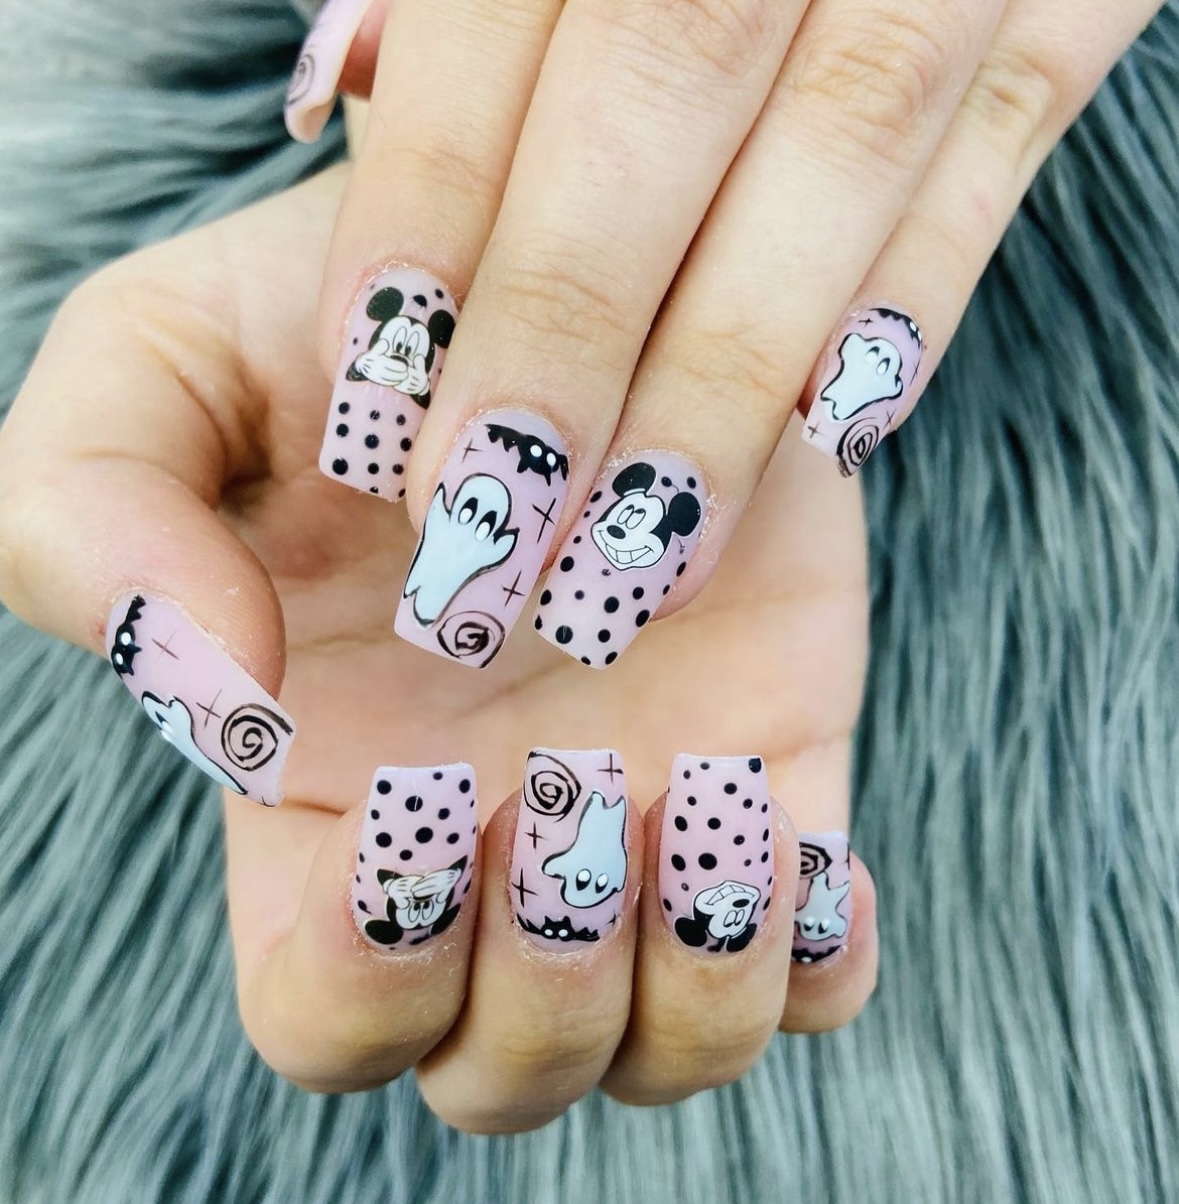 10 Easy Nail Art Designs and Tips Using Acrylic Paint Pens | Archer and  Olive